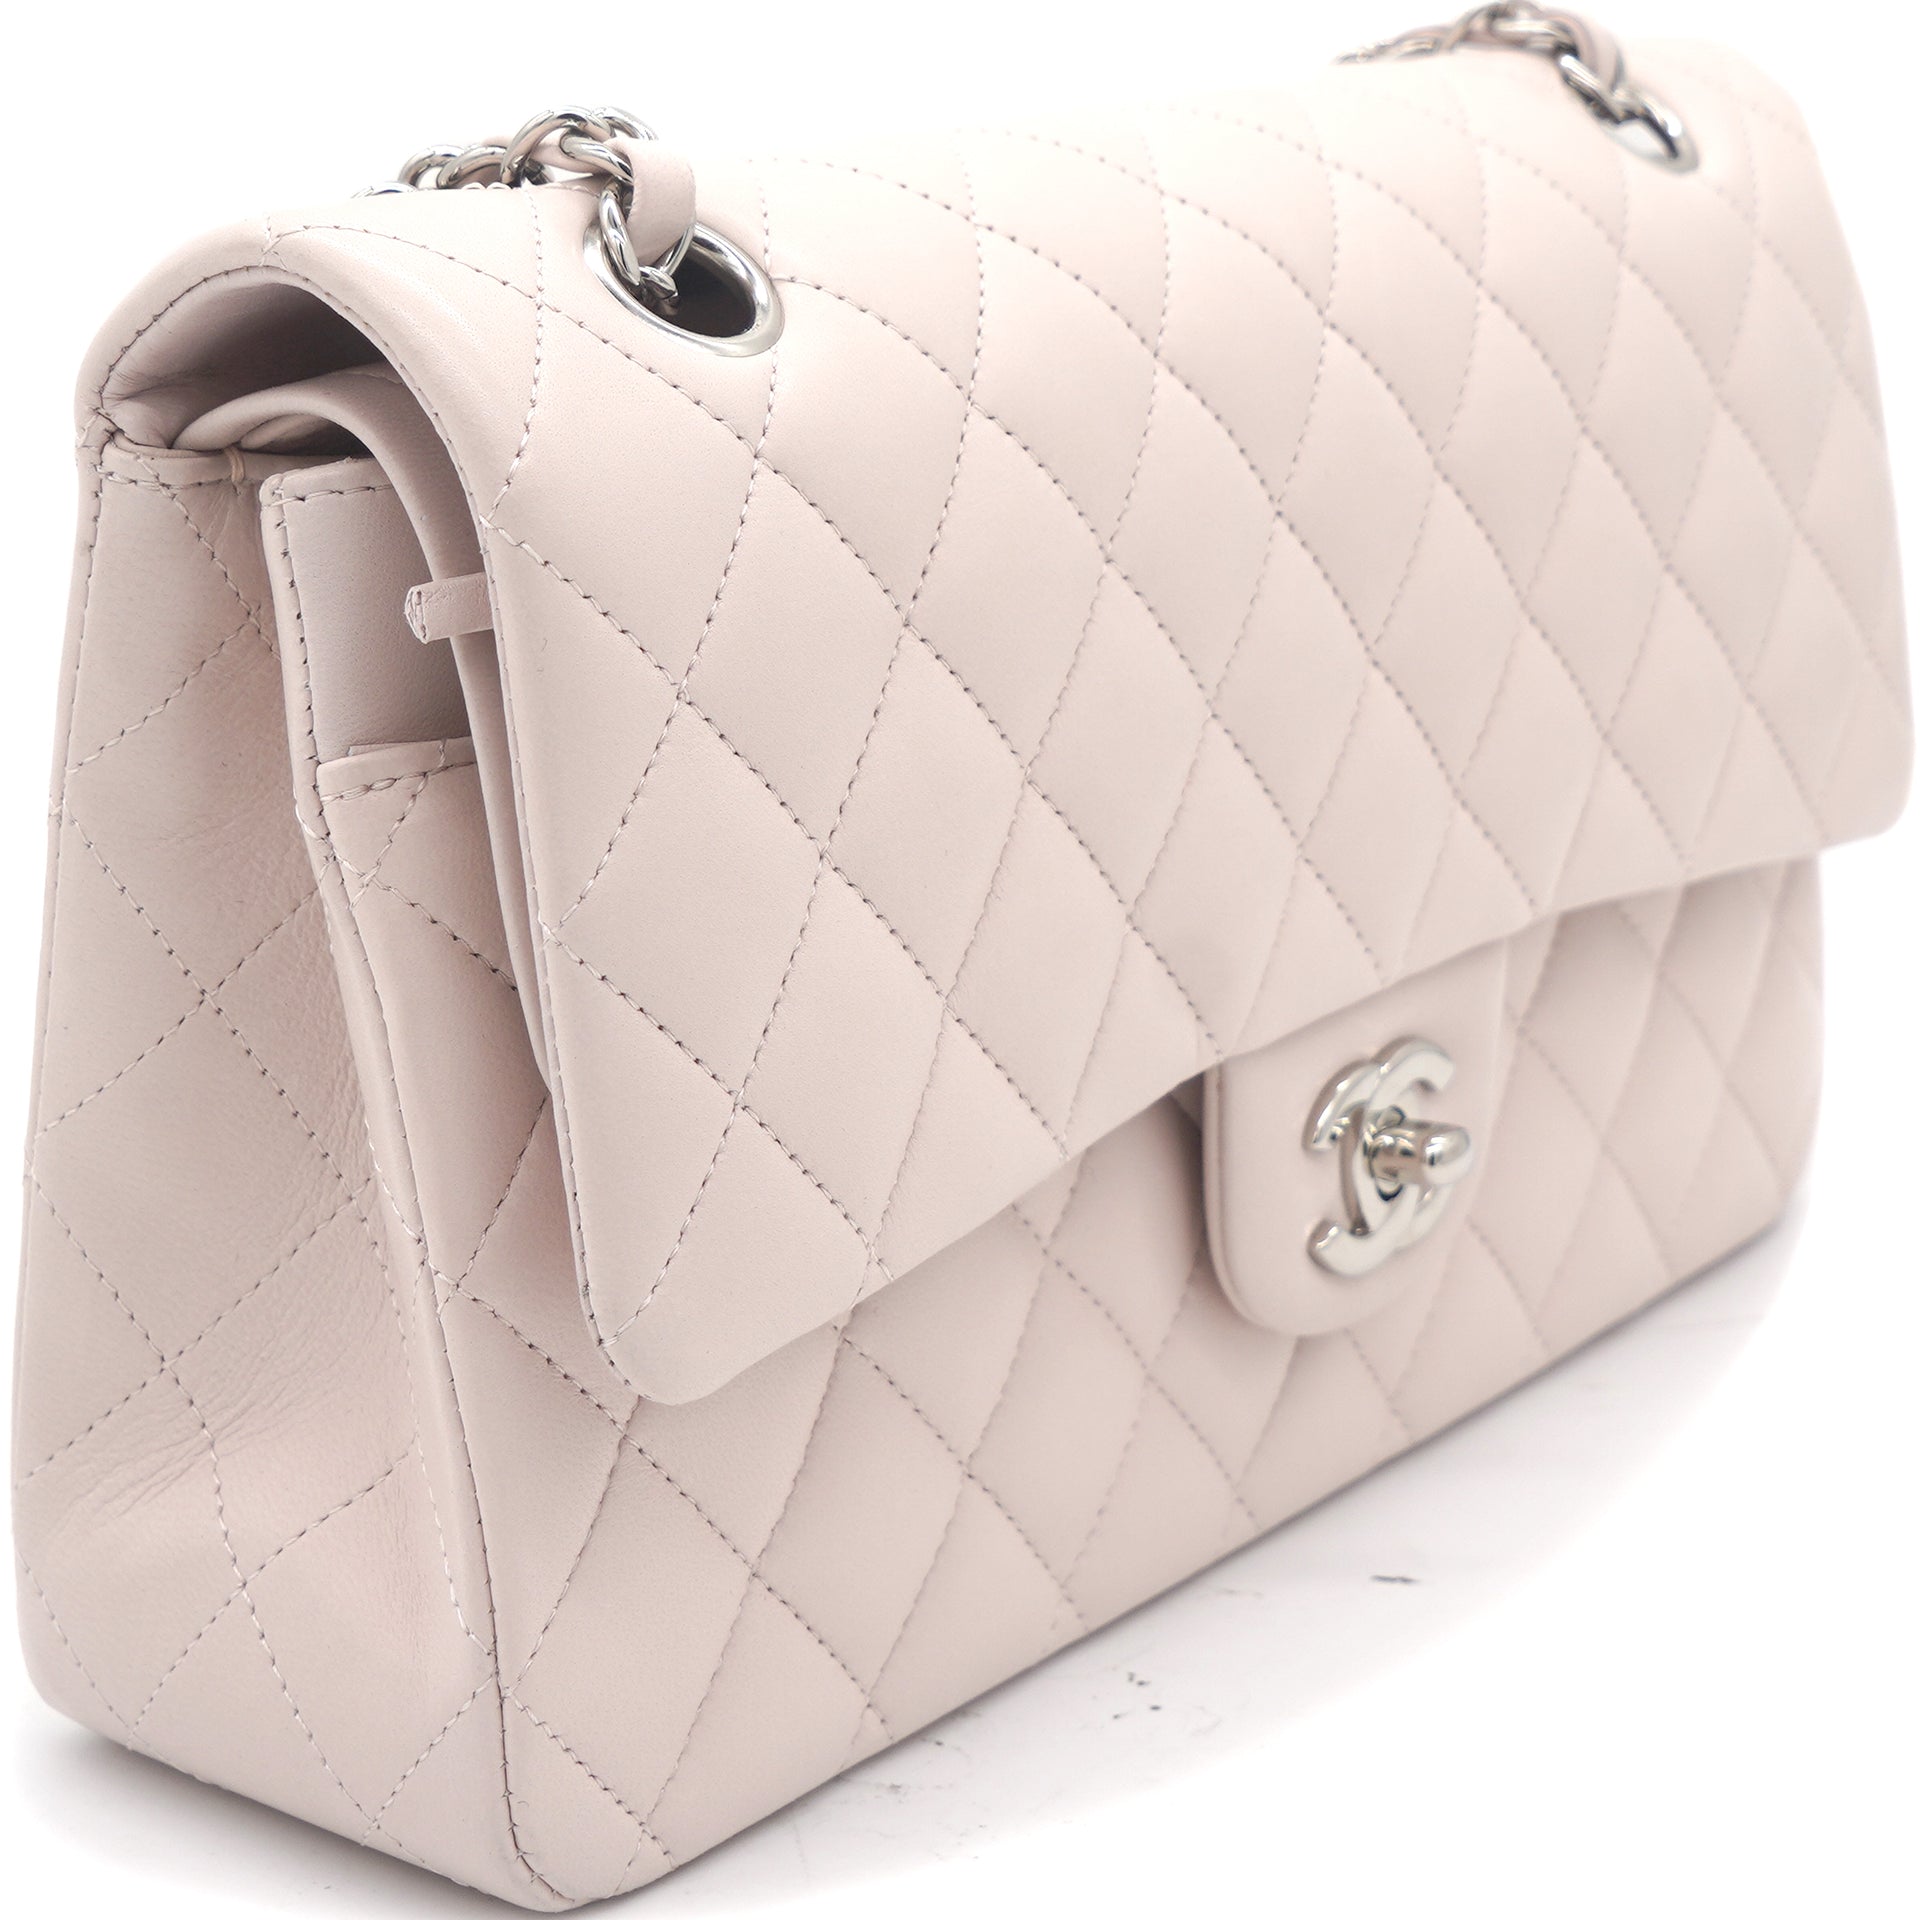 quilted flap bag